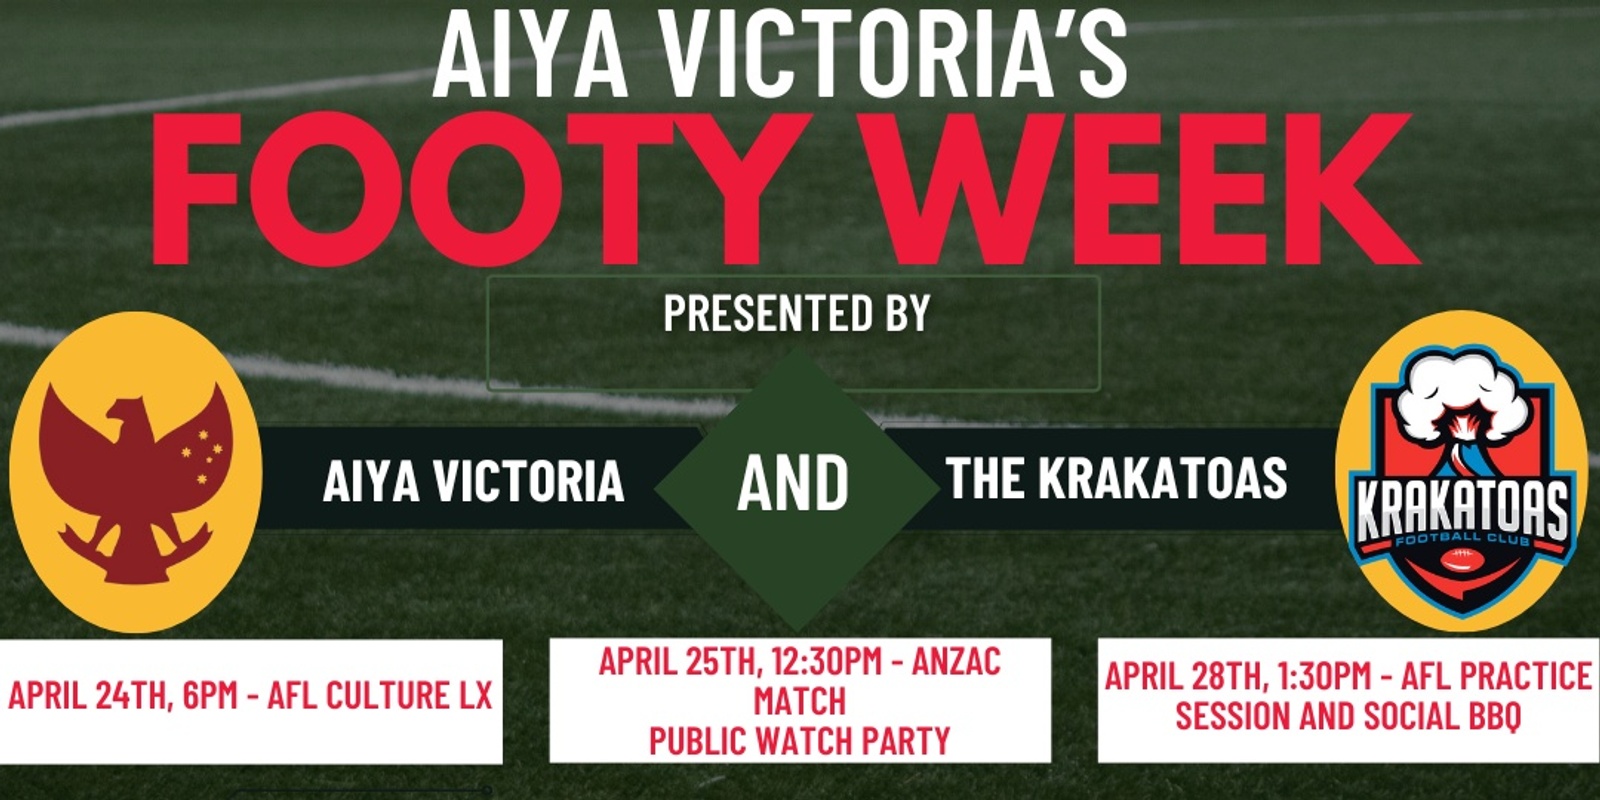 Banner image for AIYA Victoria's Footy Week: AFL Practice Session and BBQ with the Krakatoas Football Club